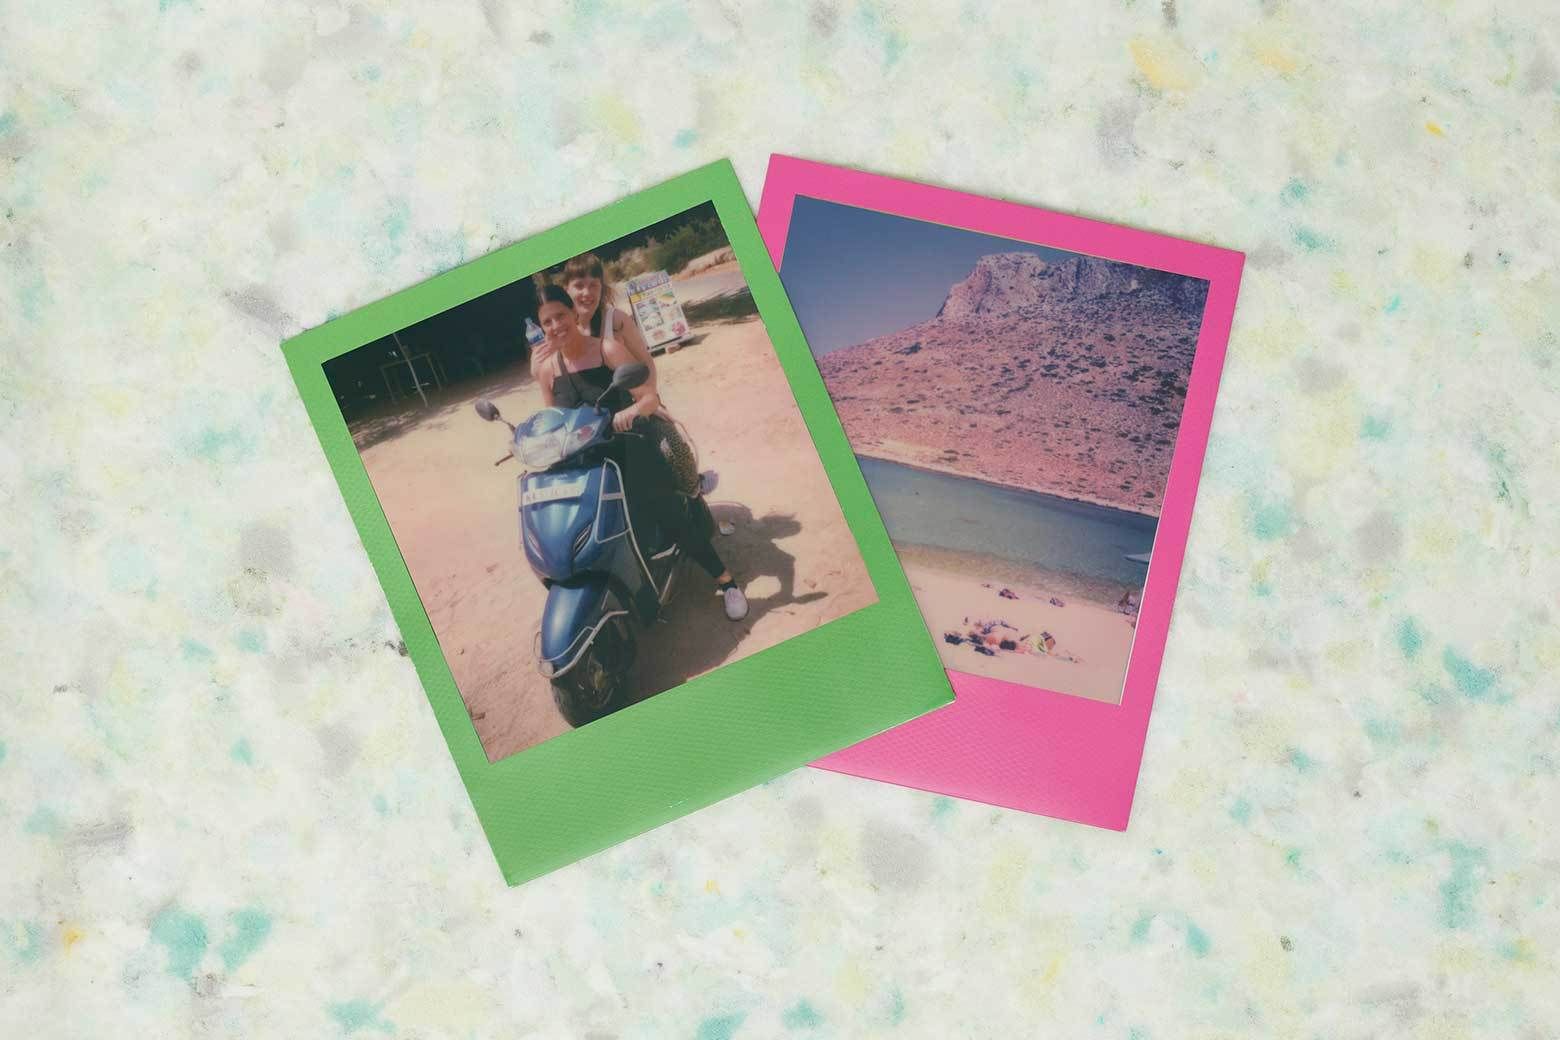 POLAROID Color Film 600 - Round Frame – Town & Country Surf